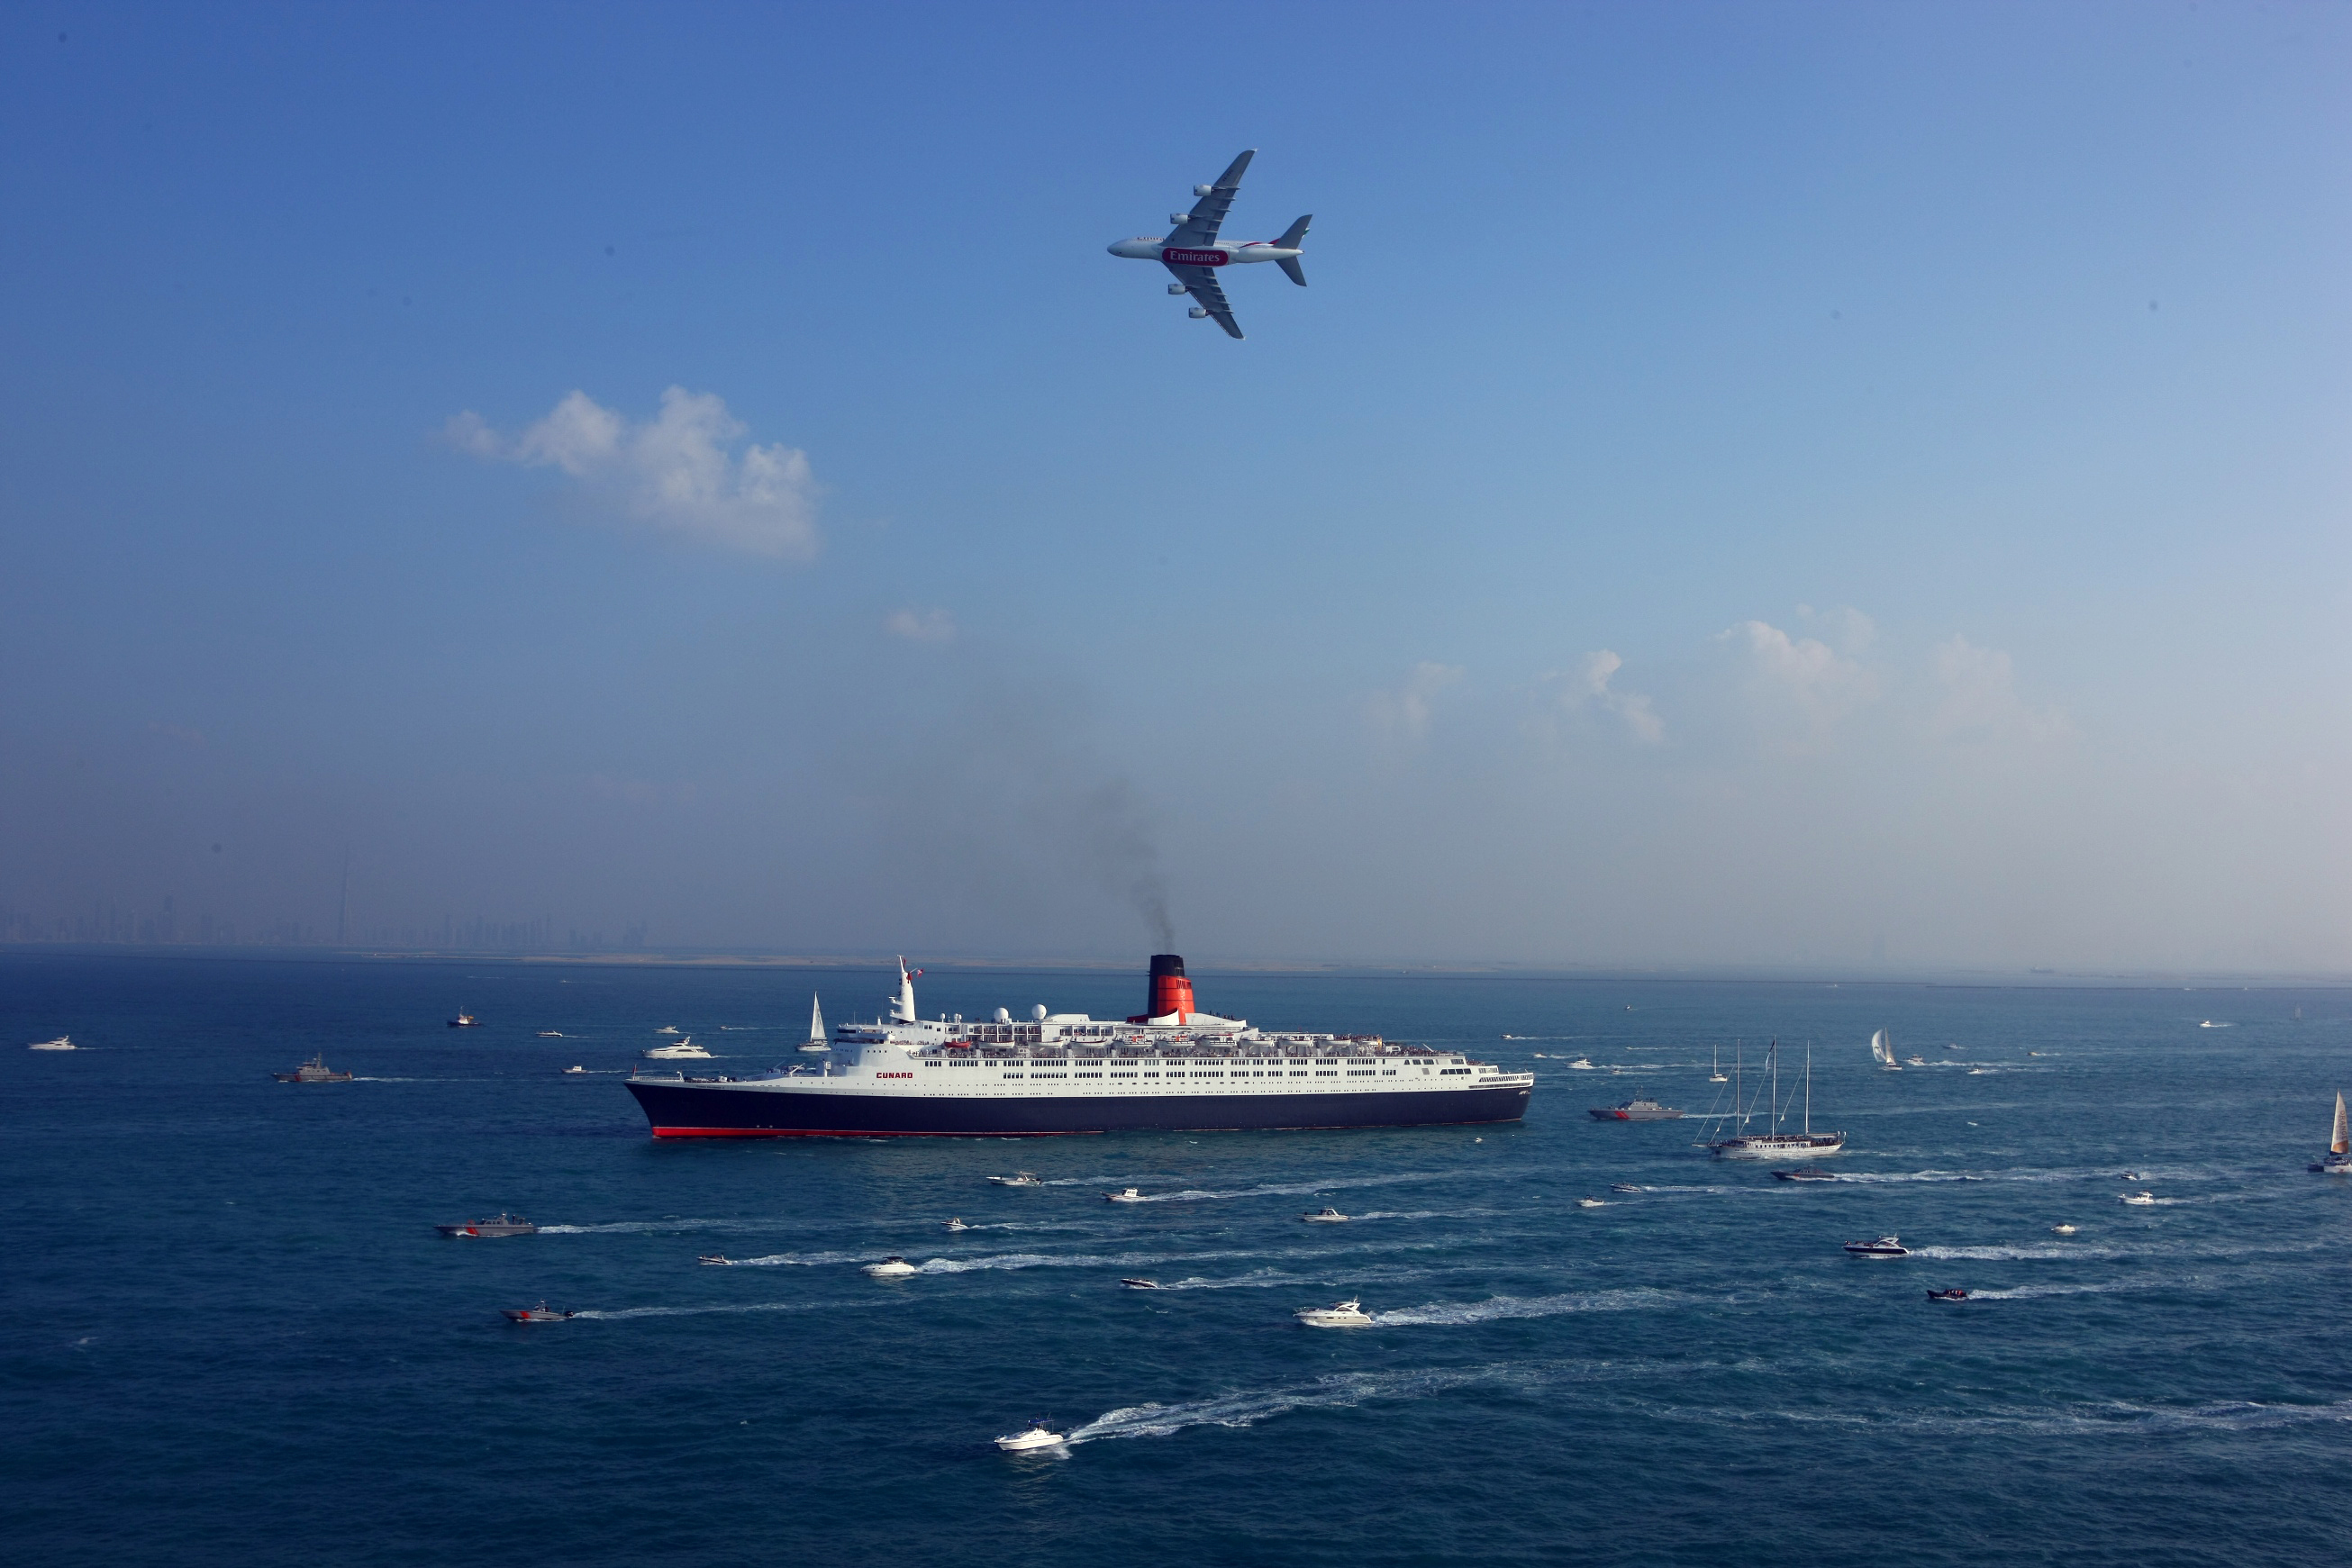 queen, Elizabeth, 2, Emirates, Airline, Airbus, A380, Aircraft, Airliner, Boats, Navy, Sea, Lots, Security, Military, Liner, Ship, Day, Passenger, Side, View, Sky Wallpaper